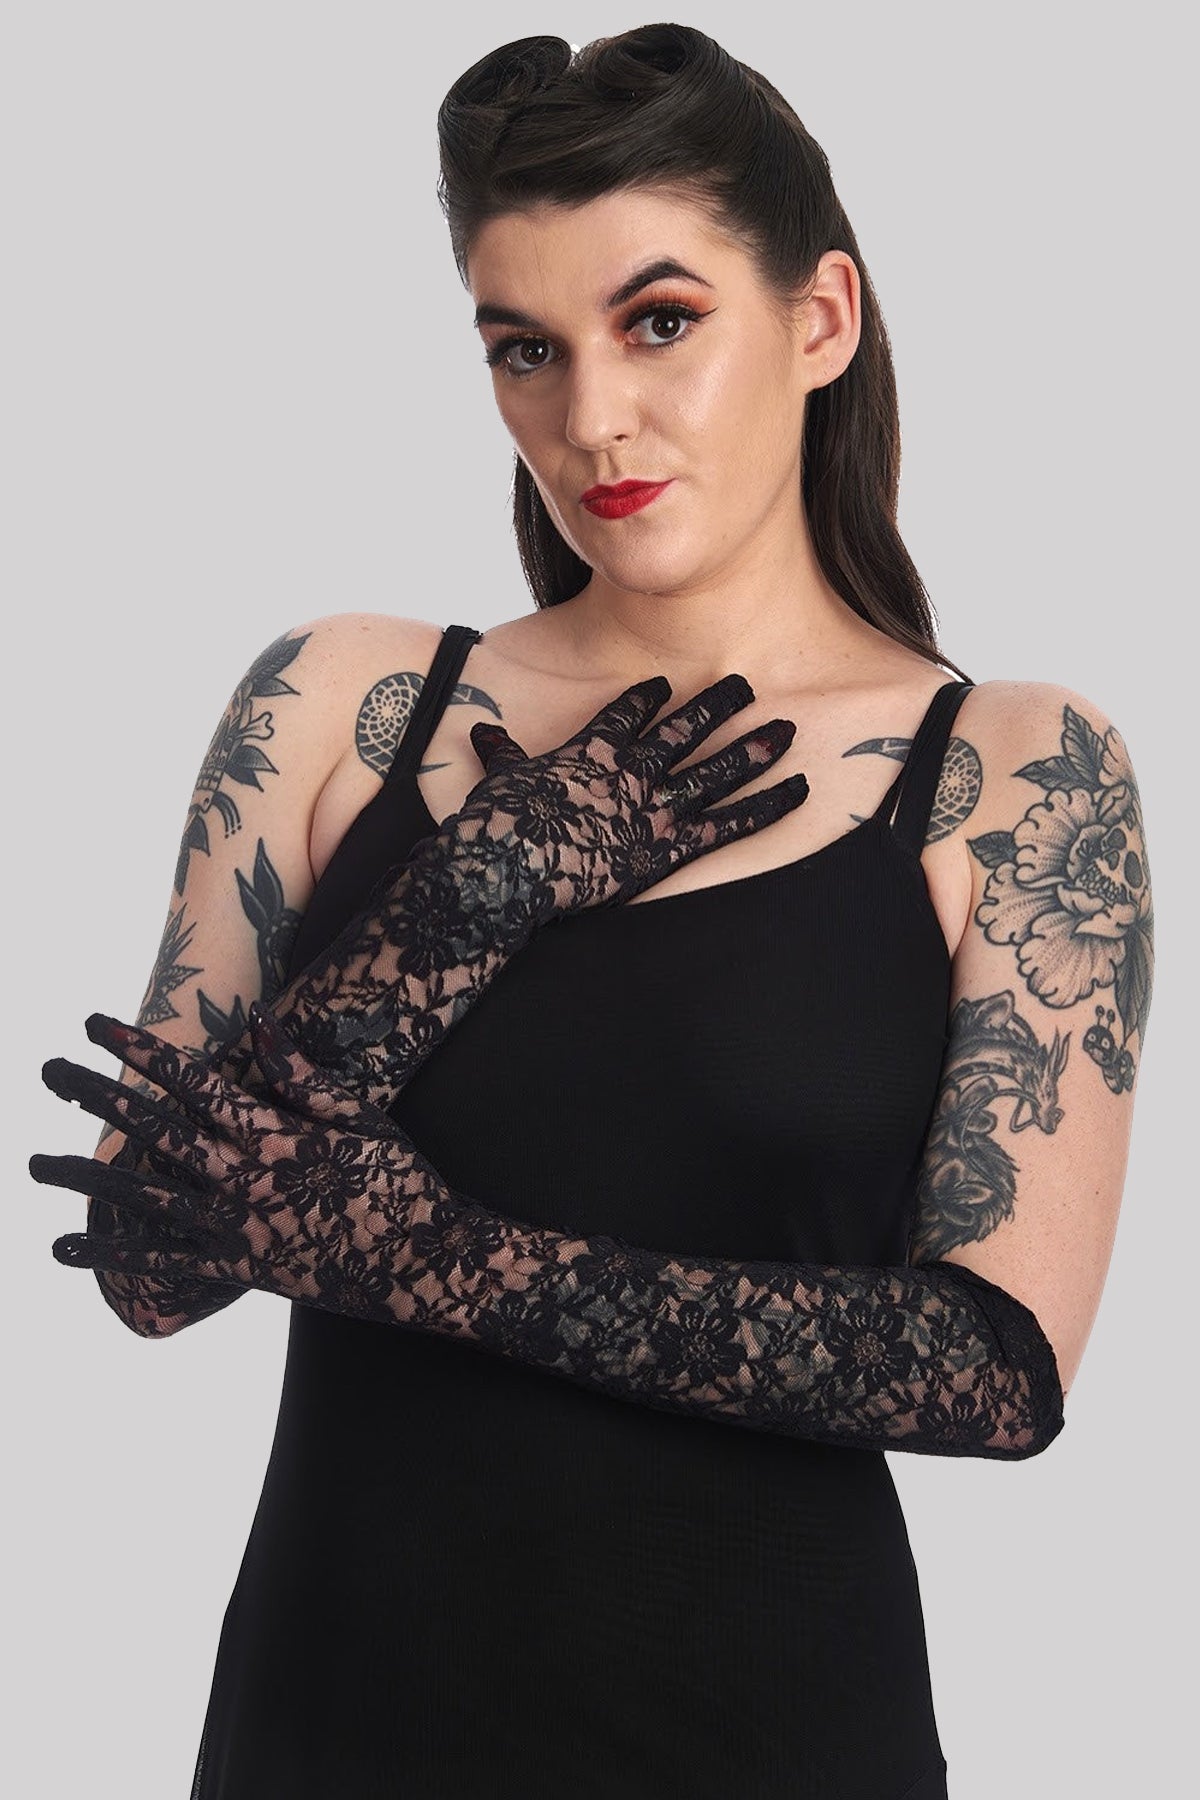 Banned Sybil Long Lace Opera Elbow Length Gloves,Black,One Size